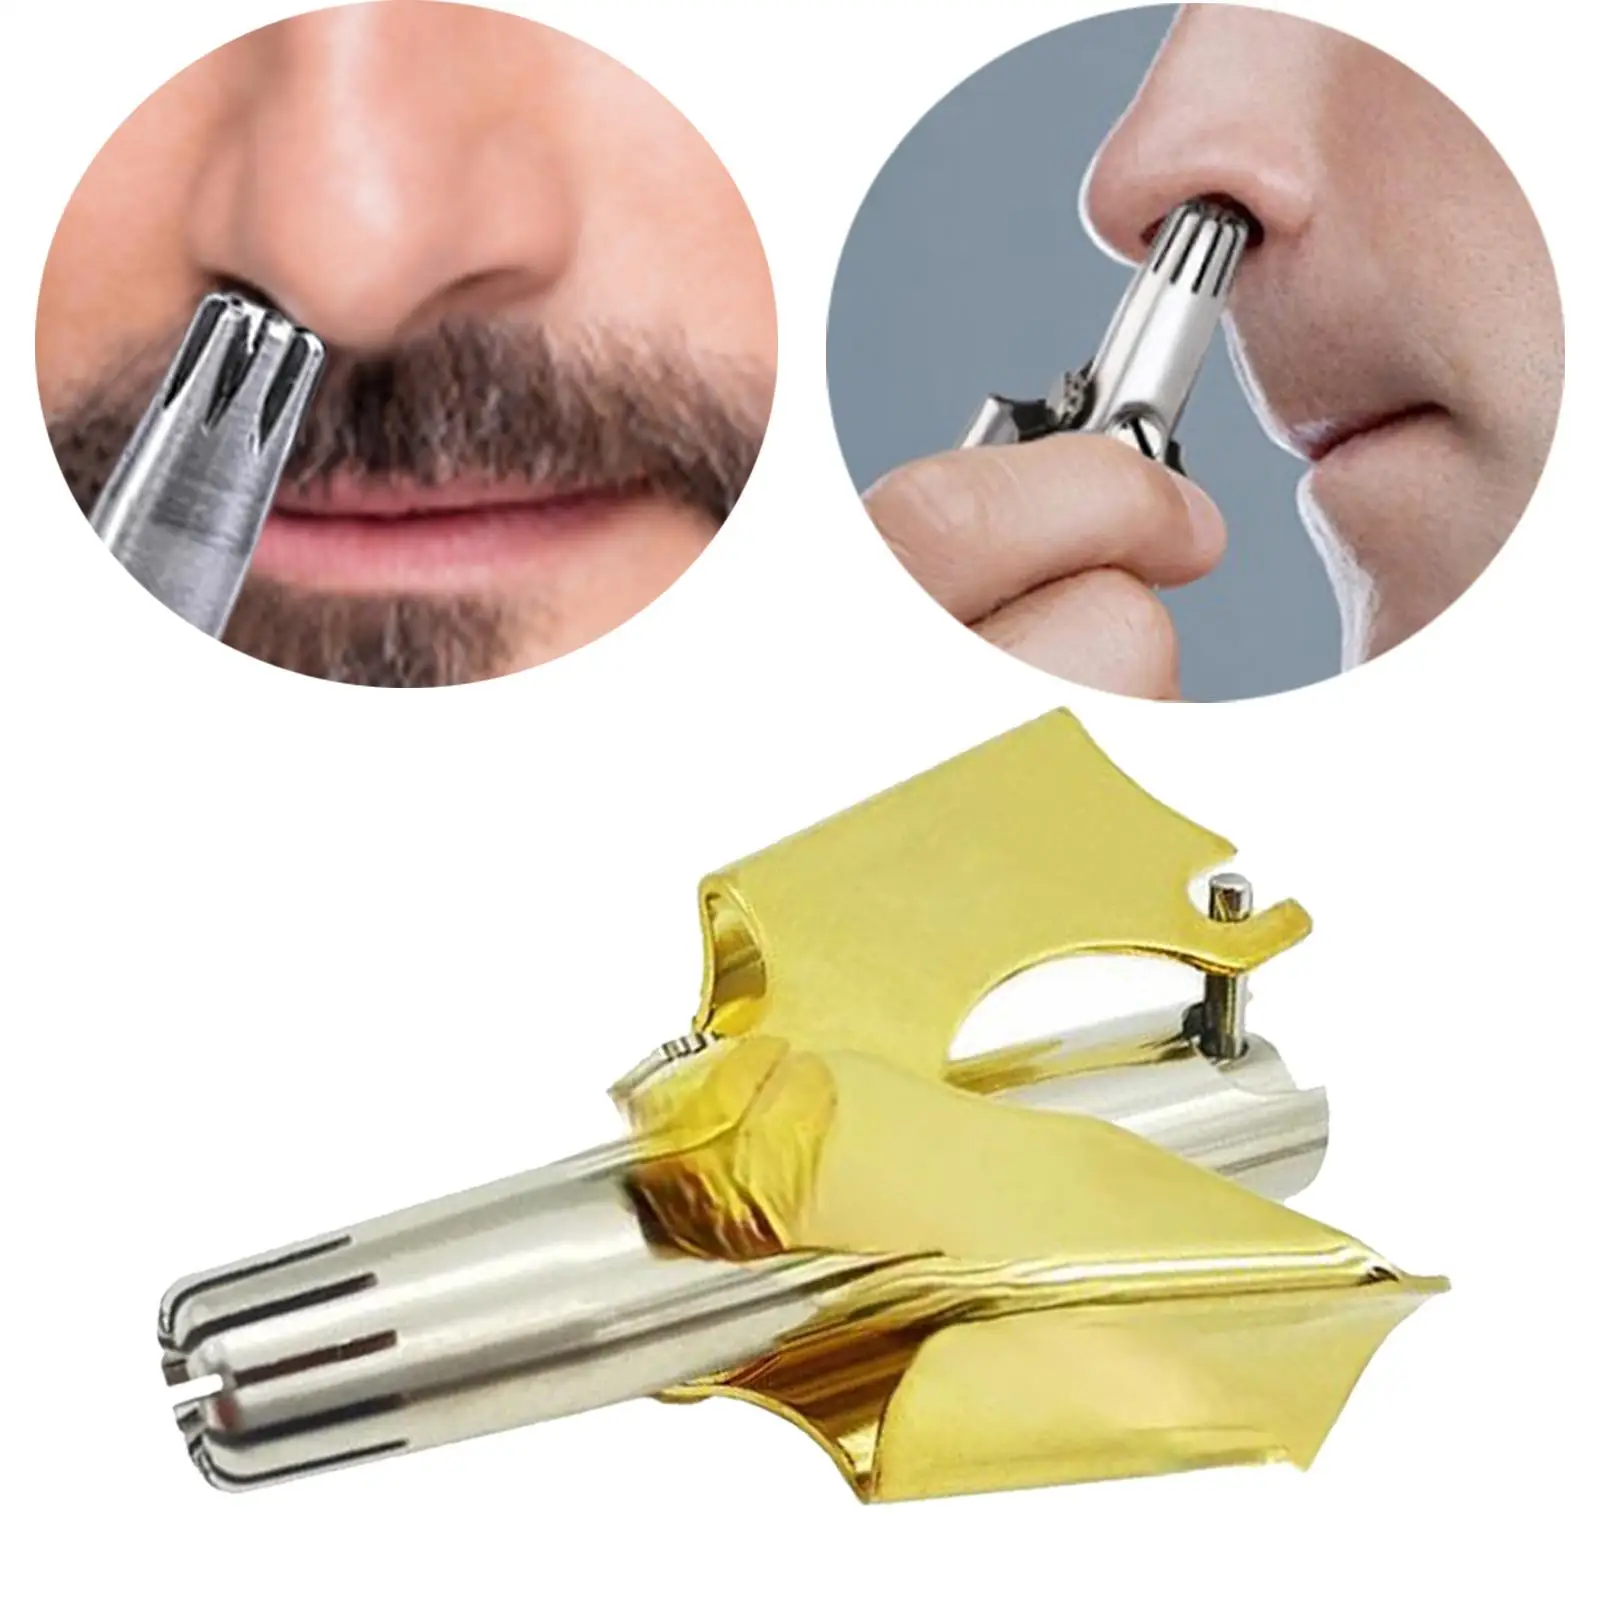 Nose Ear Hair Trimmer Stainless Steel Whole Body Washable Nose Razor Shaver Low Manual Noise Ear Hair Cutter Gifts for Men Gold